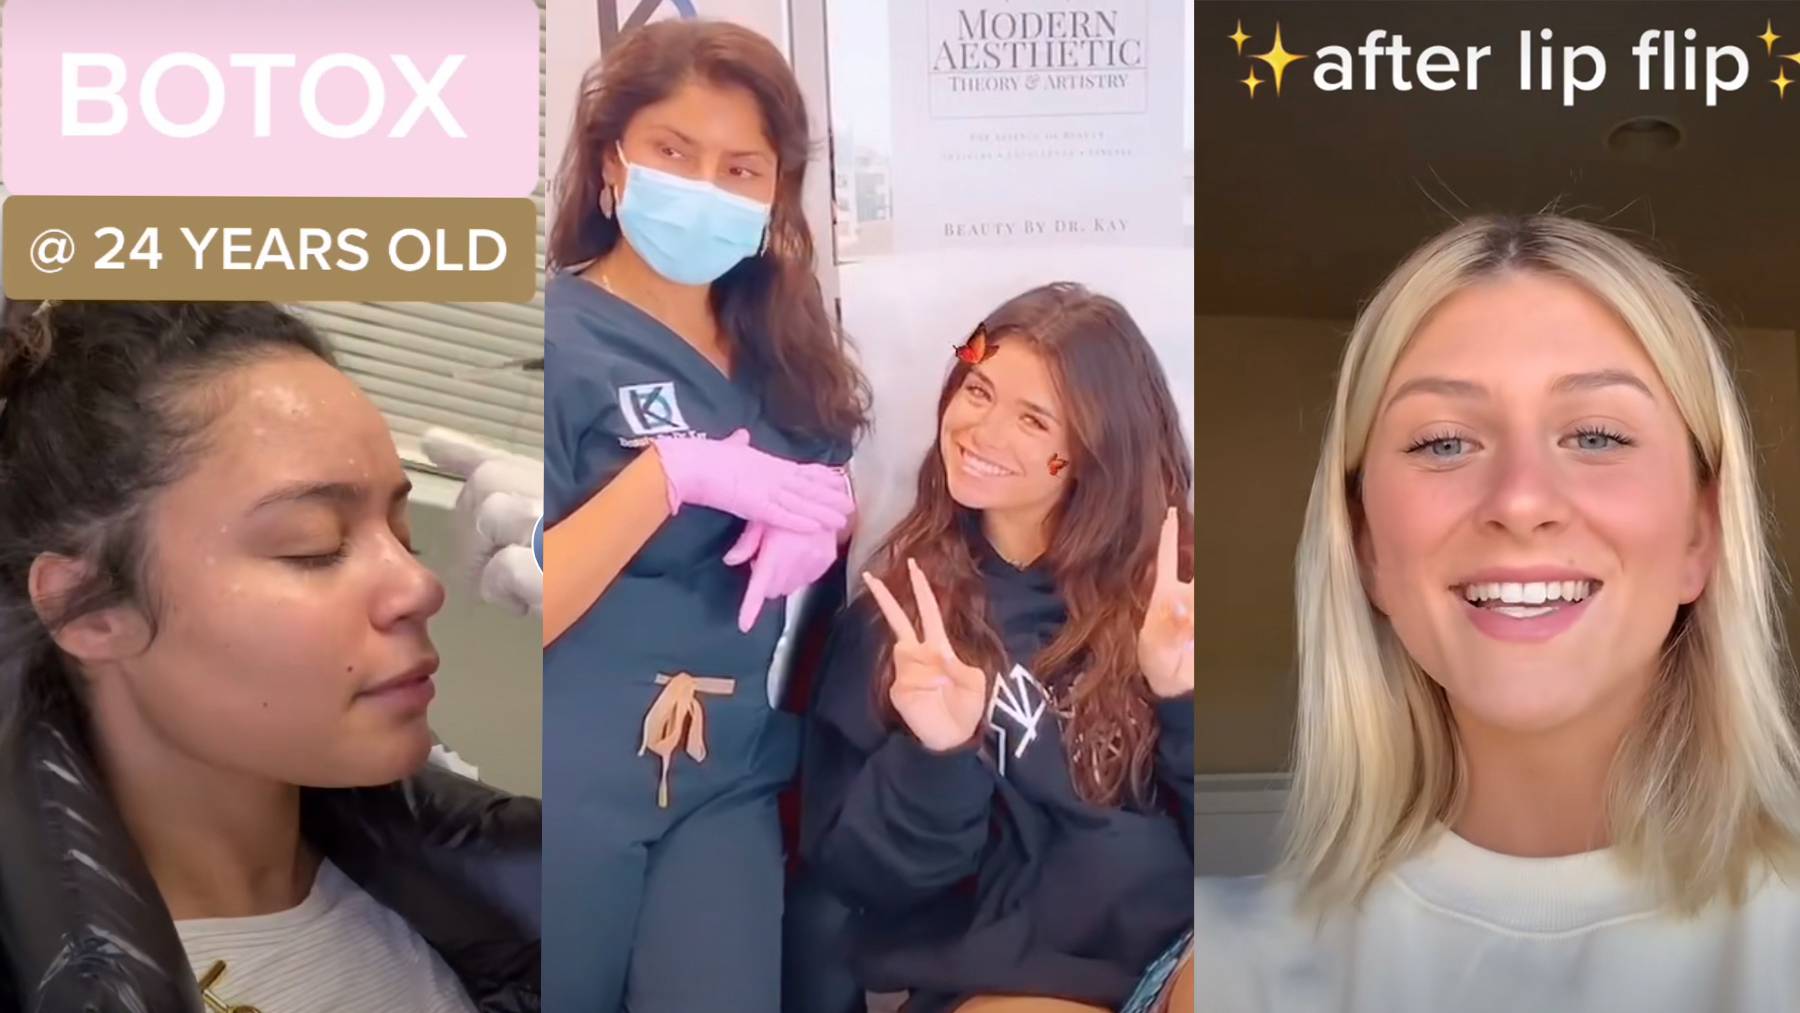 Minor cosmetic procedures like Botox, "lip-flips" and fillers are on the rise among young consumers. Source: TikTok @adrienedavidson, @beautybydrkay, @jillian_dearwater.